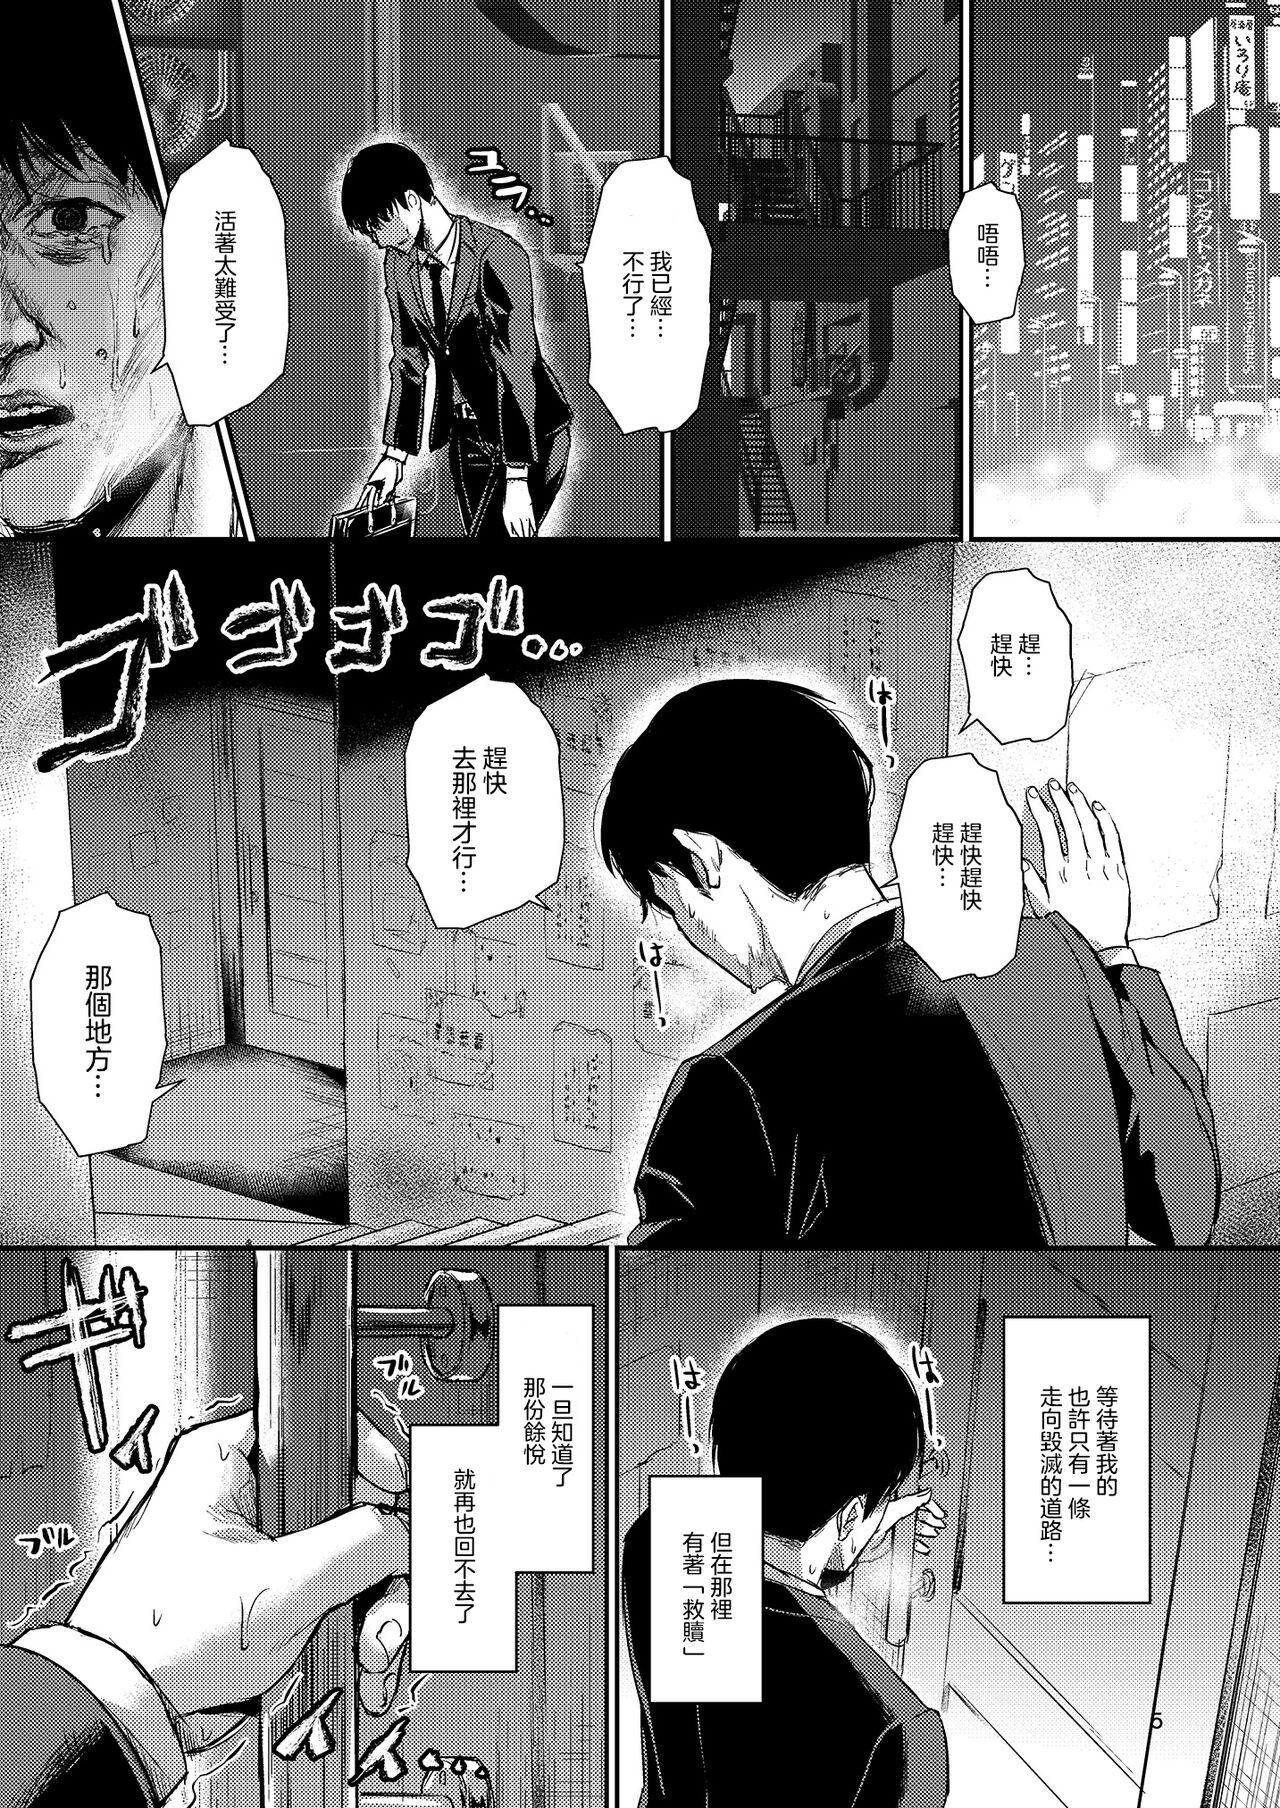 Fuck For Money Homehome Home e Youkoso! - Welcome to Home Home Home! | 歡迎來到誇誇屋！ Gagging - Page 6